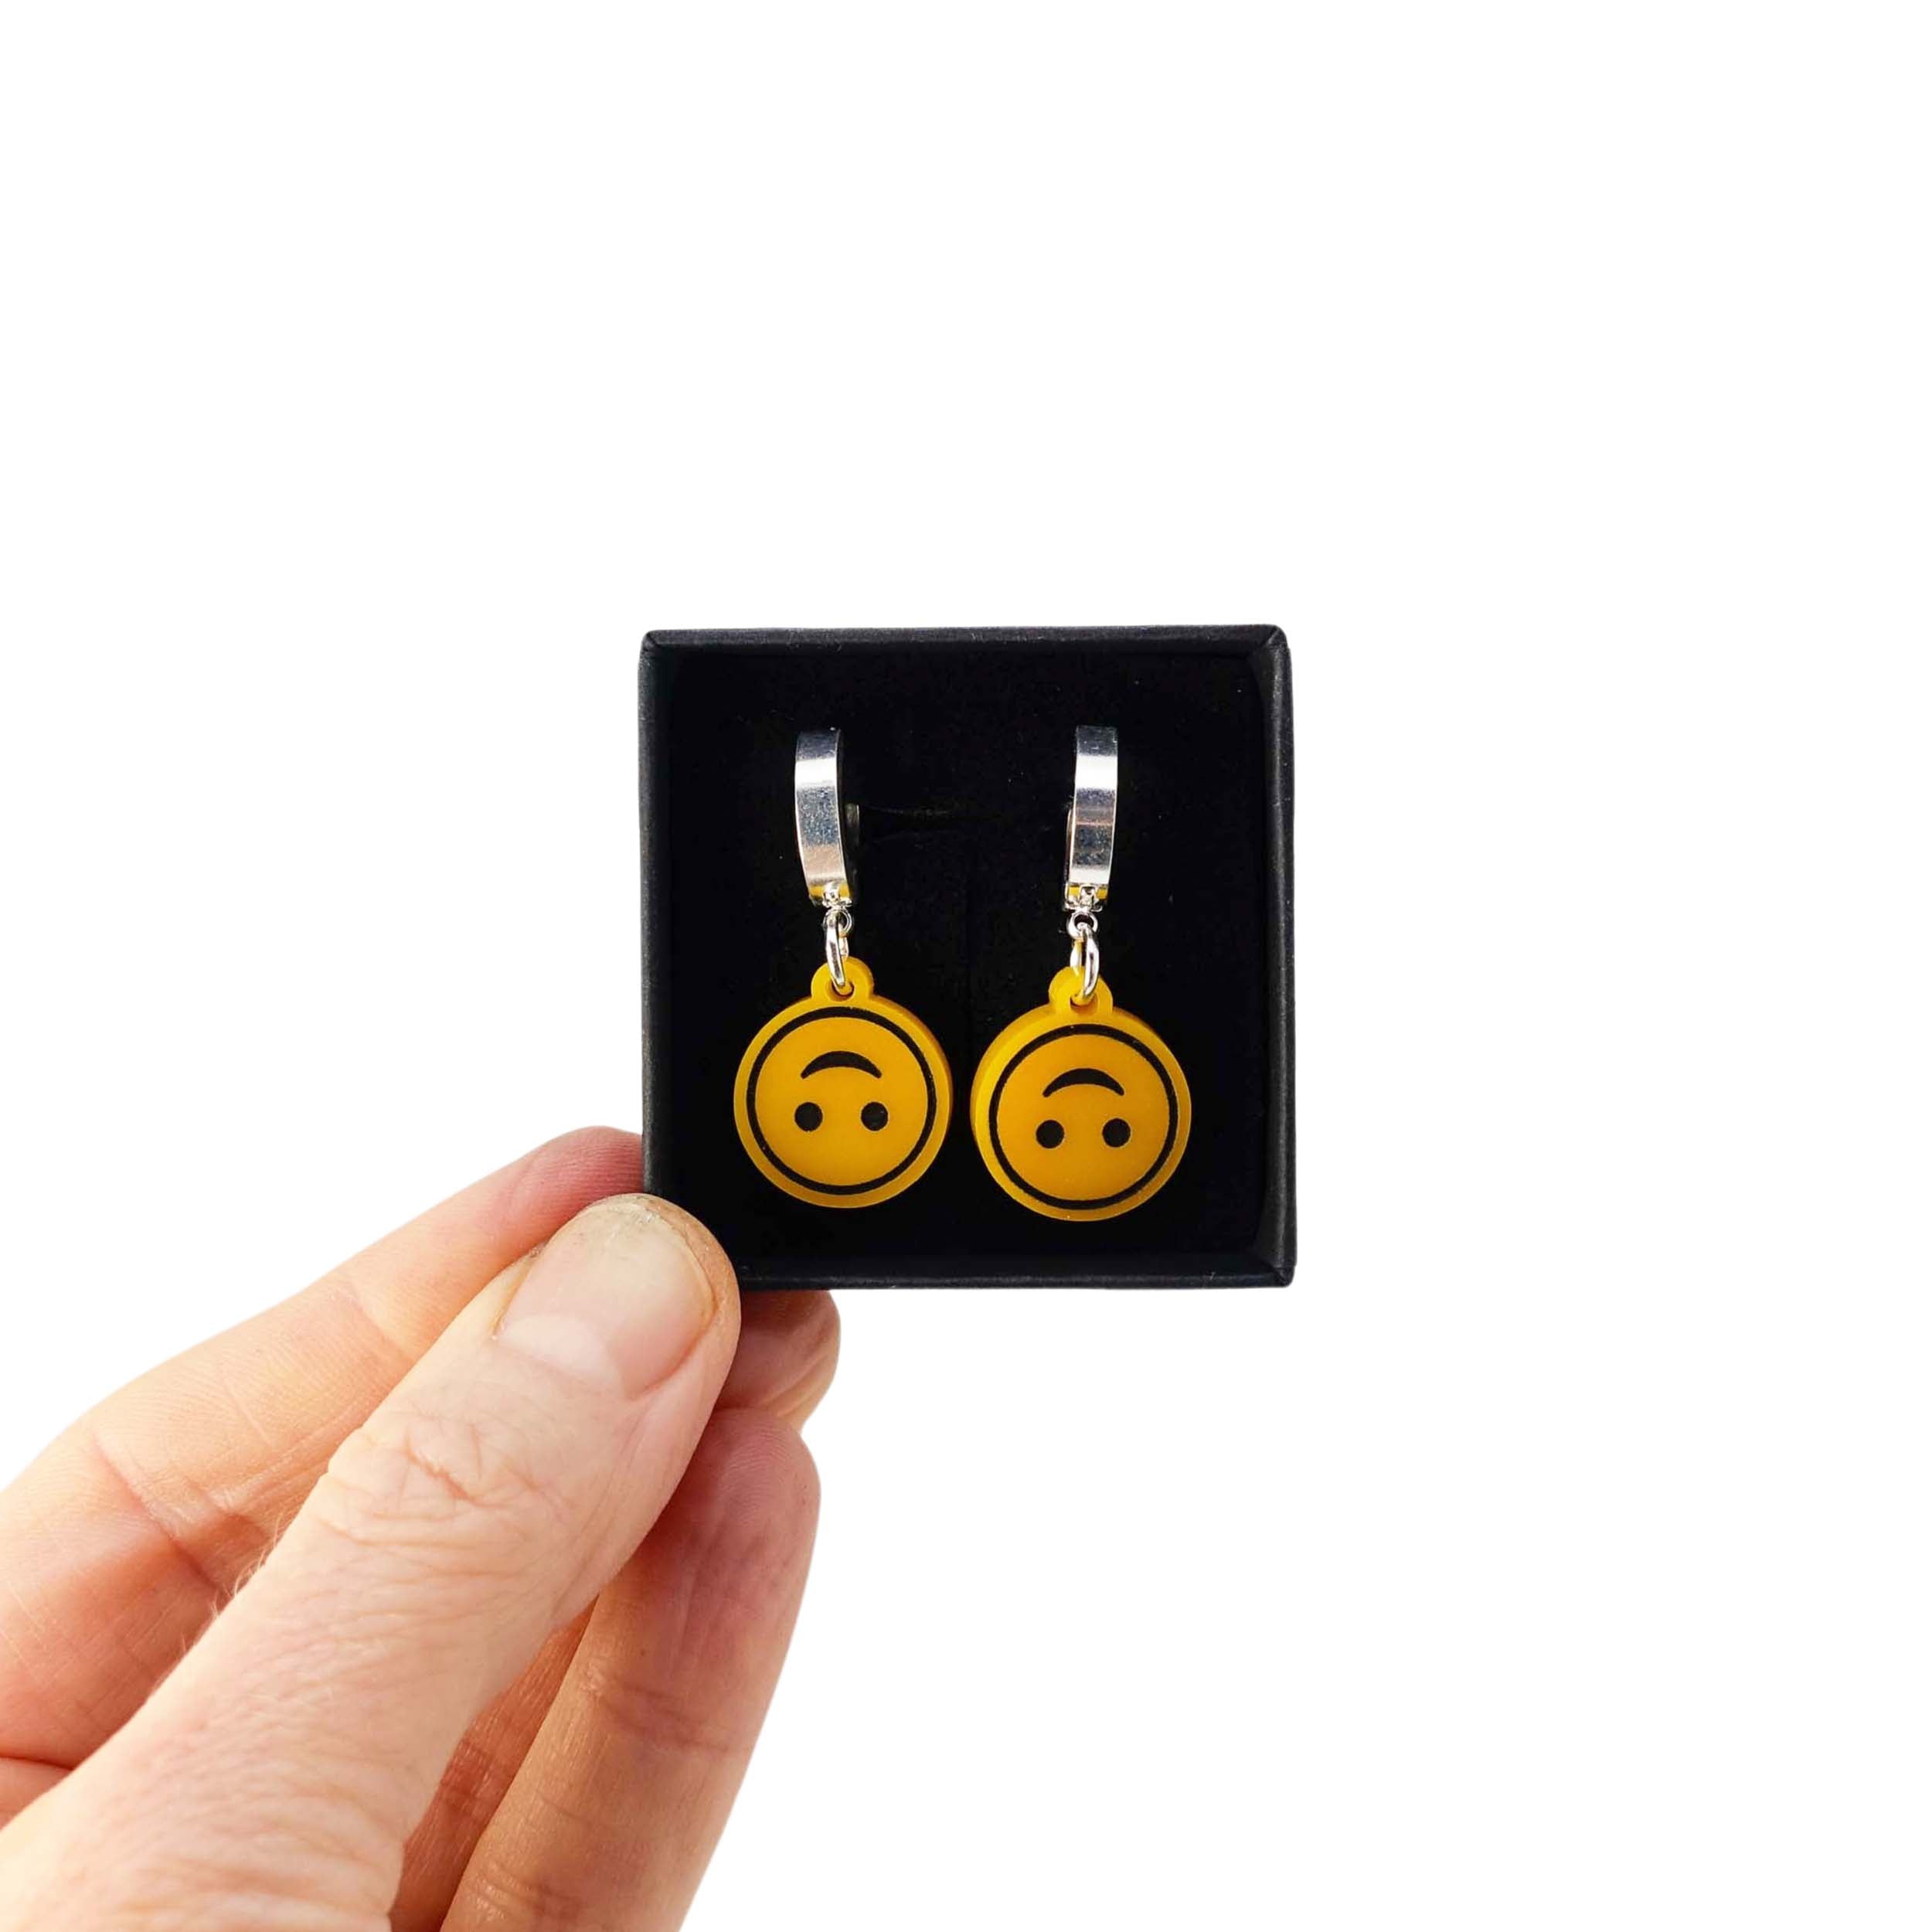 Upside-down smiley face earrings on silver huggie hoops, shown held up in a Wear and Resist gift box.